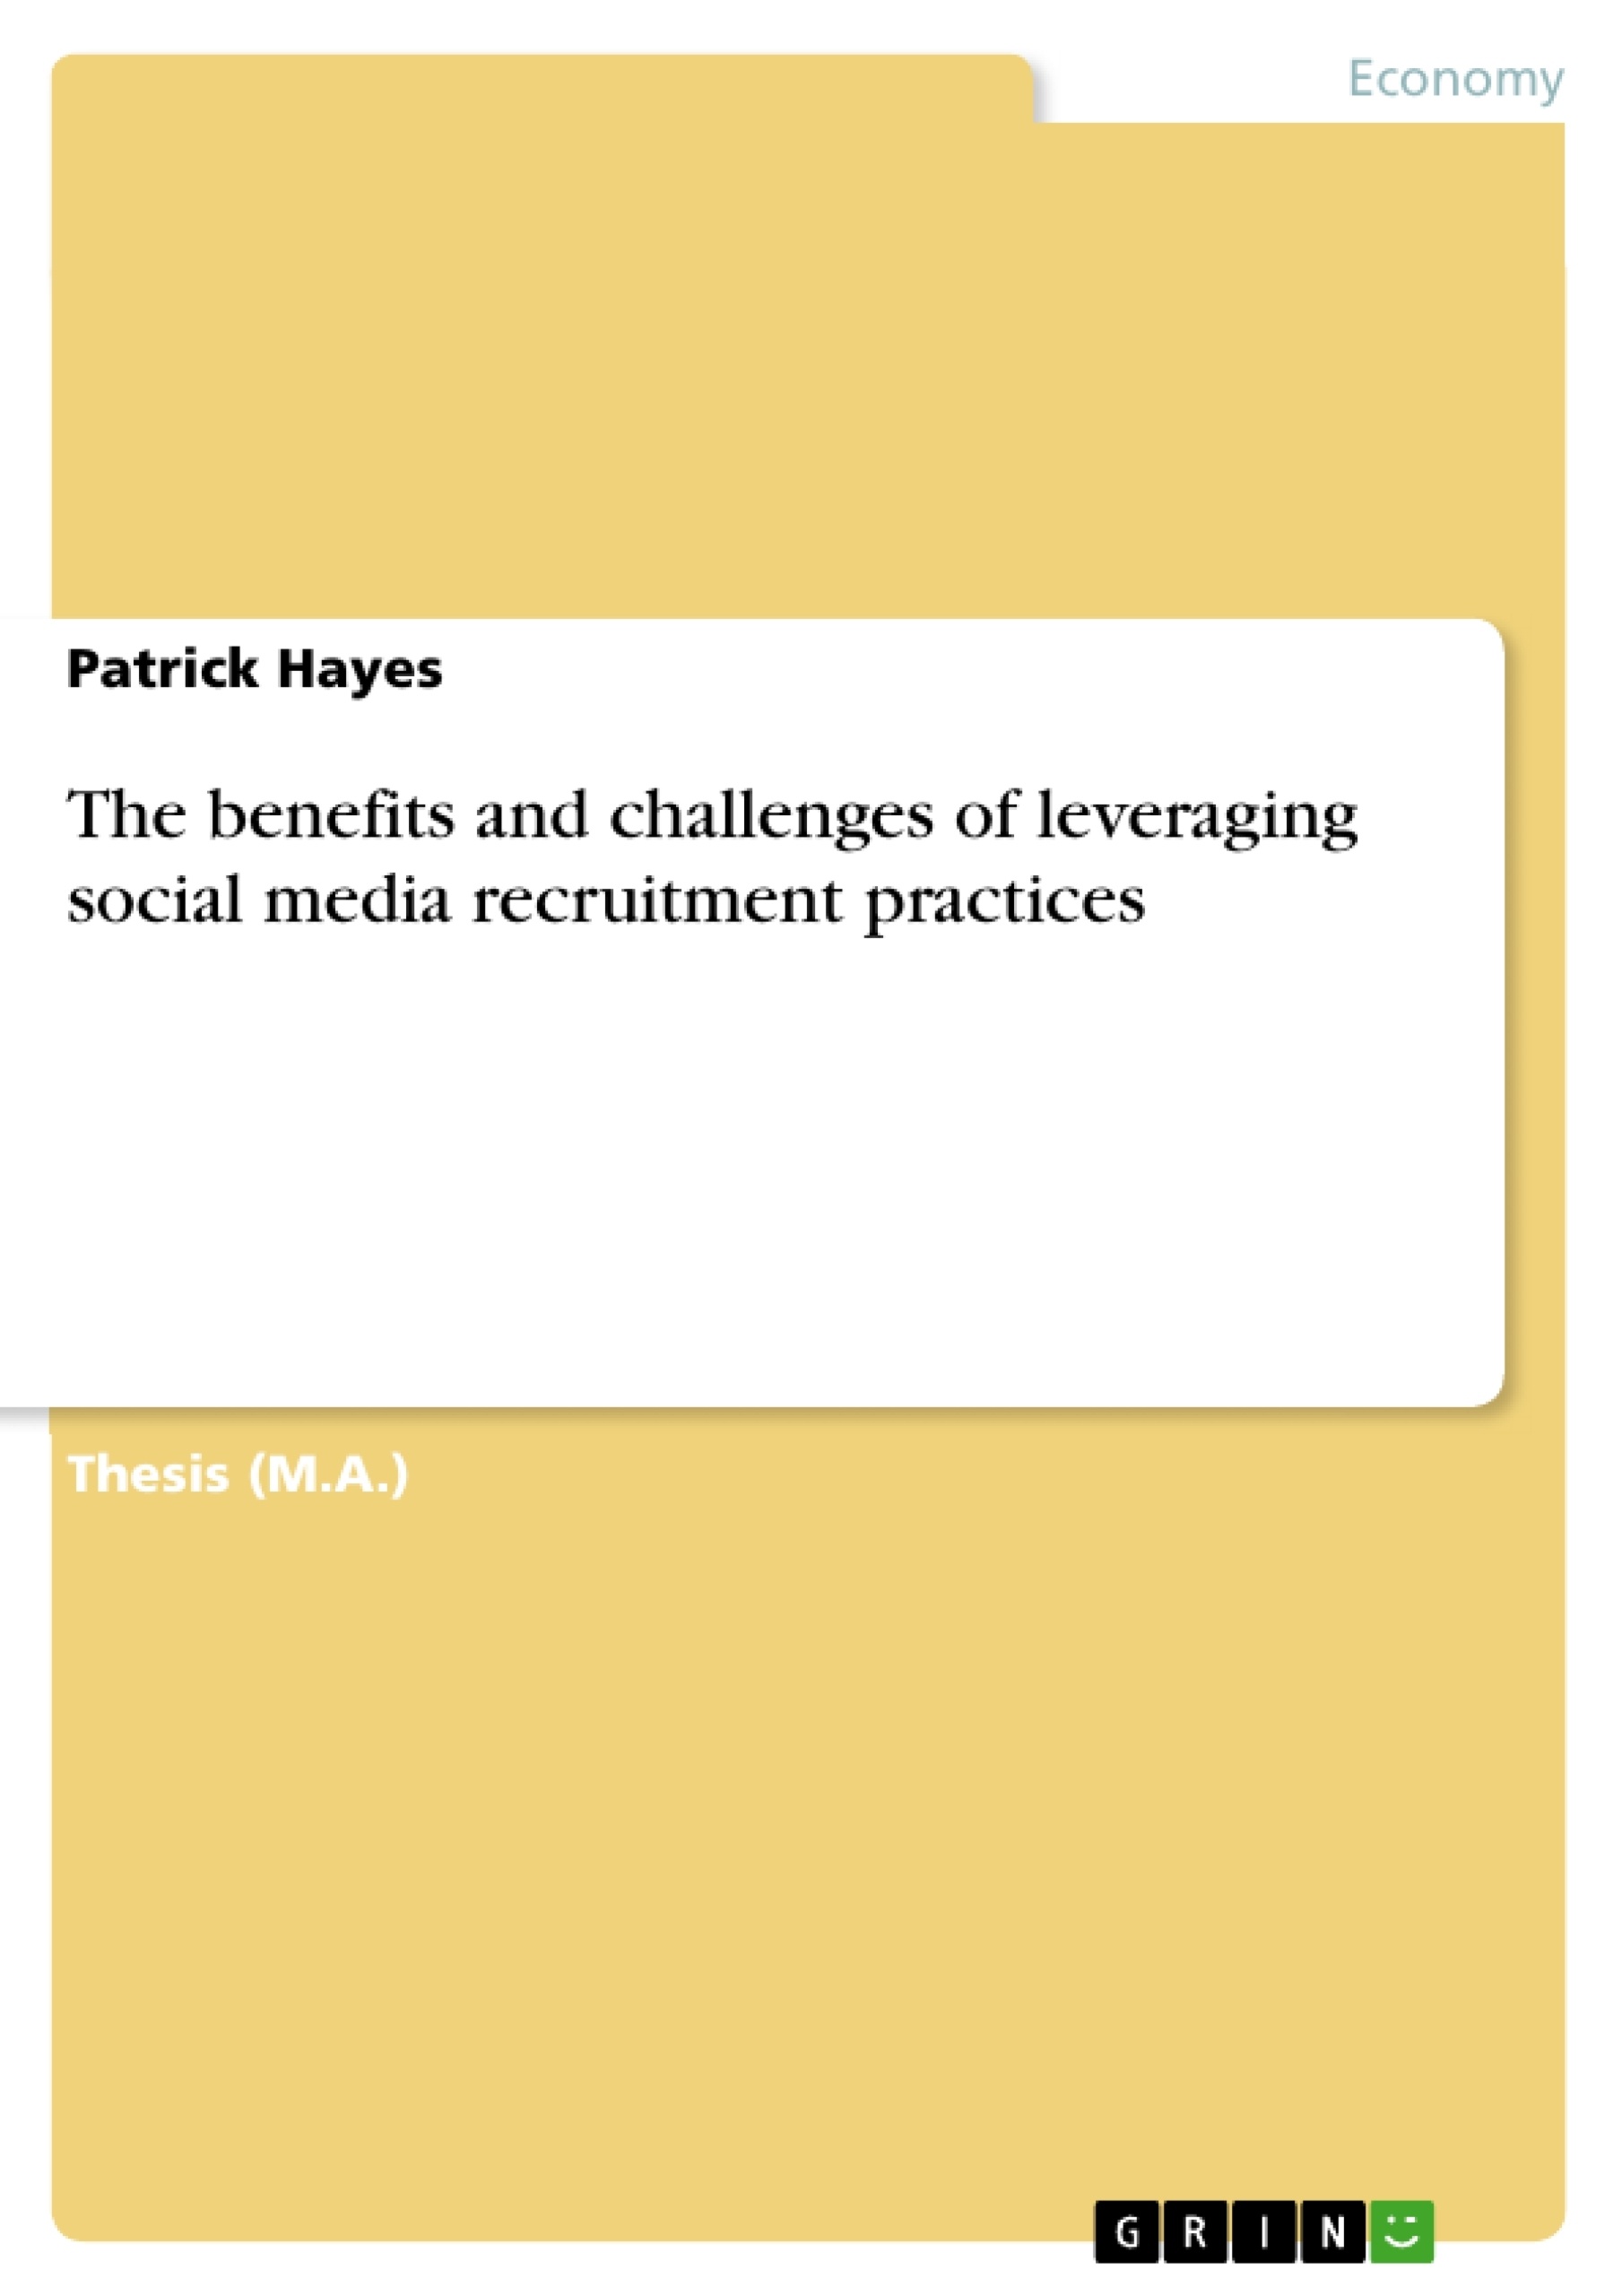 Title: The benefits and challenges of leveraging social media recruitment practices